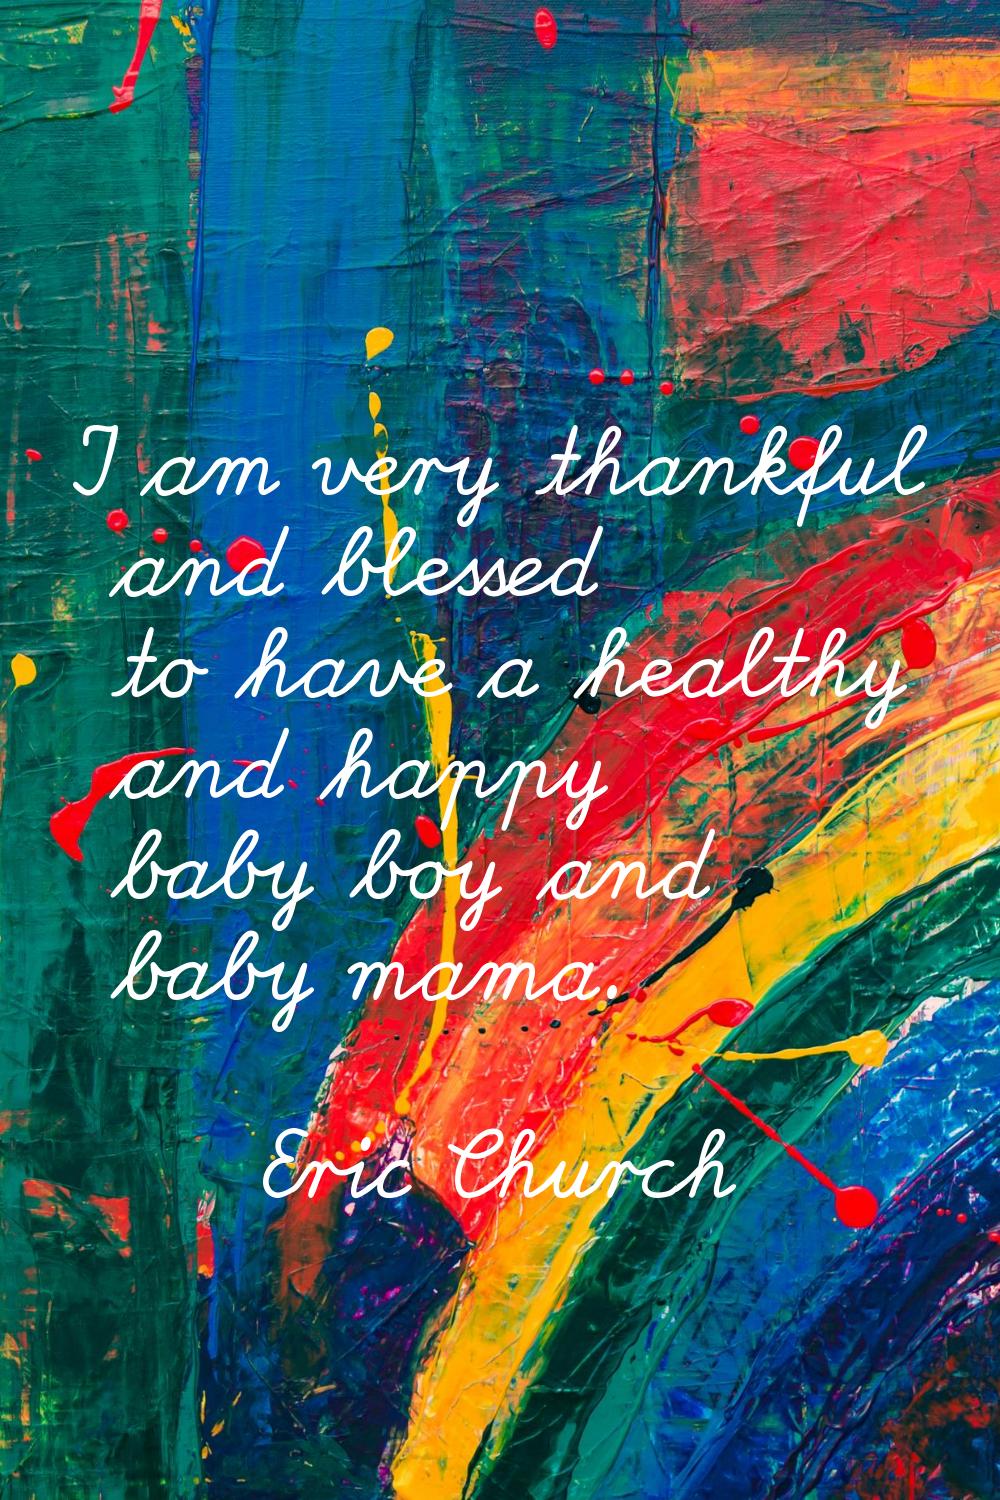 I am very thankful and blessed to have a healthy and happy baby boy and baby mama.